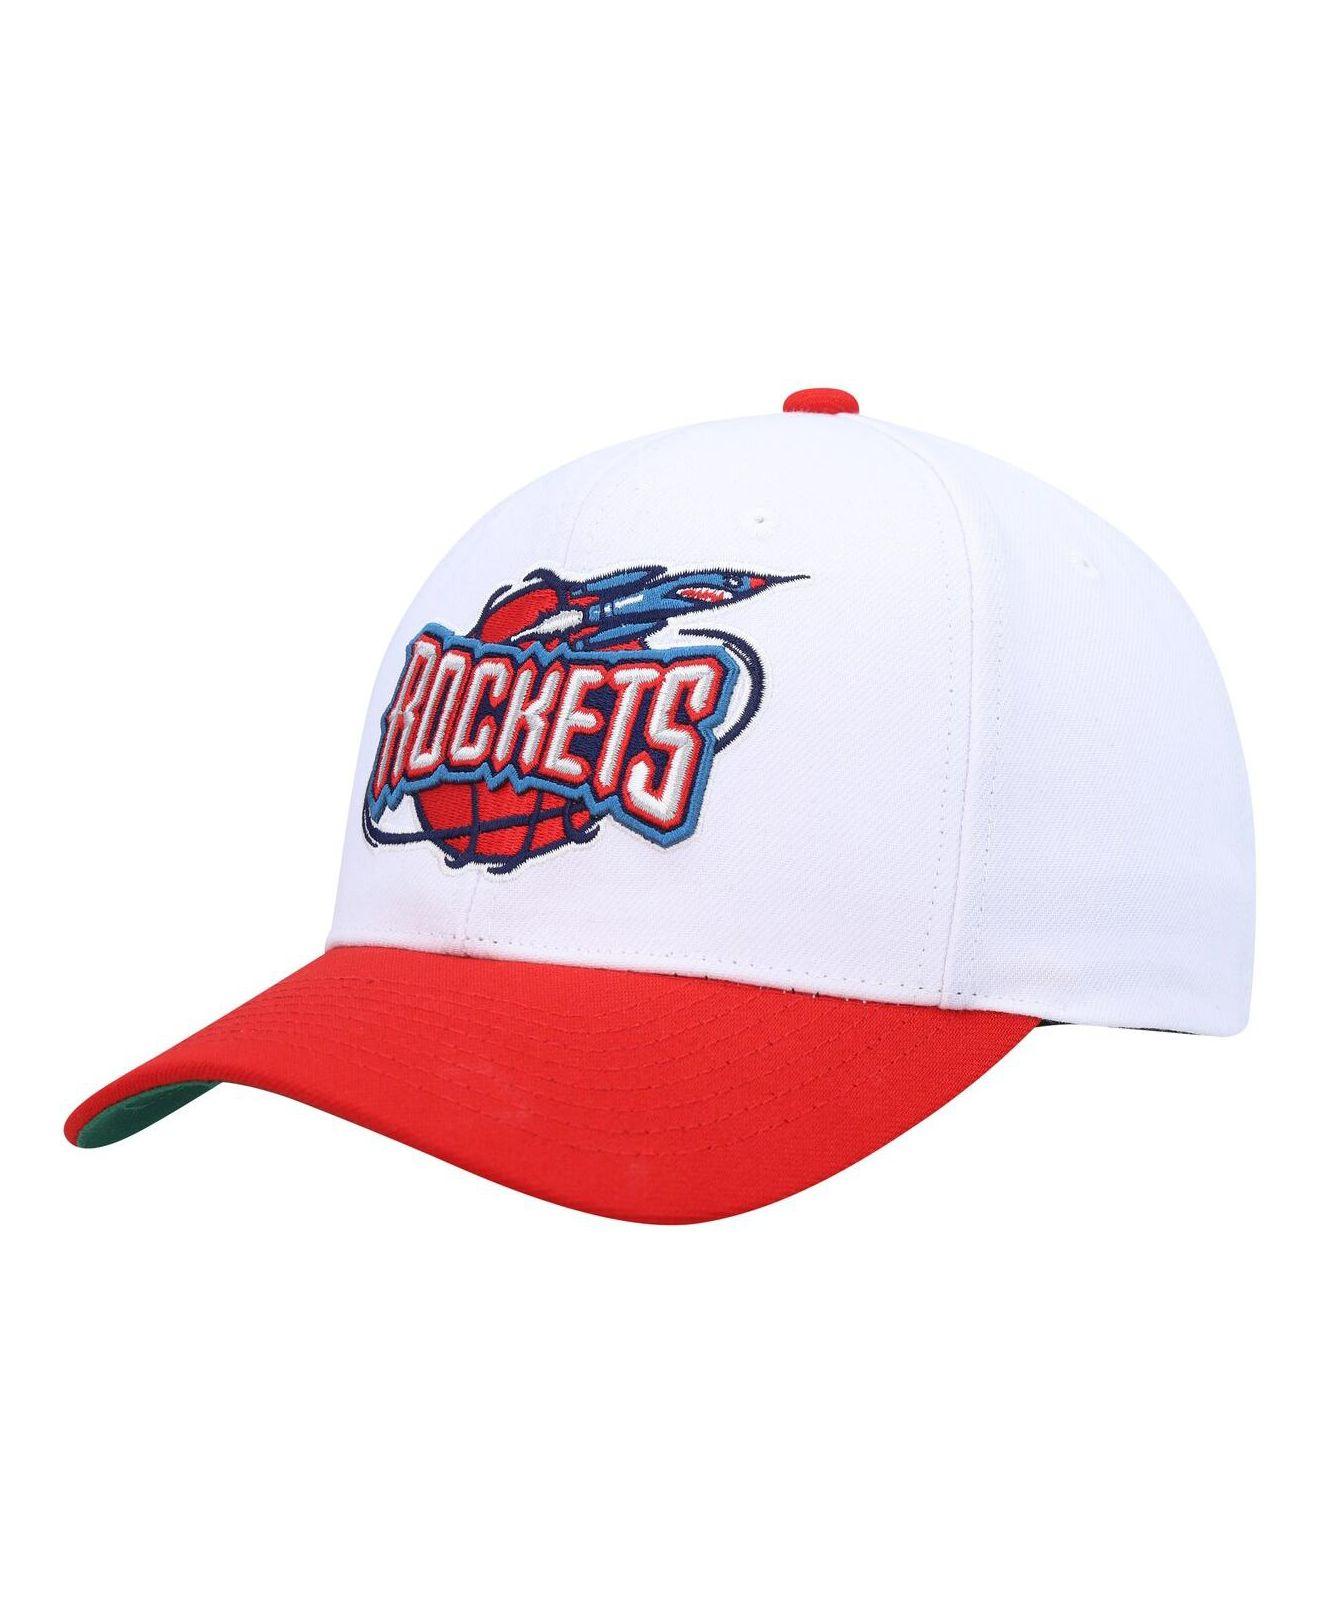 Mitchell & Ness Navy/Red New Jersey Nets Hardwood Classics Team Two-Tone 2.0 Snapback Hat